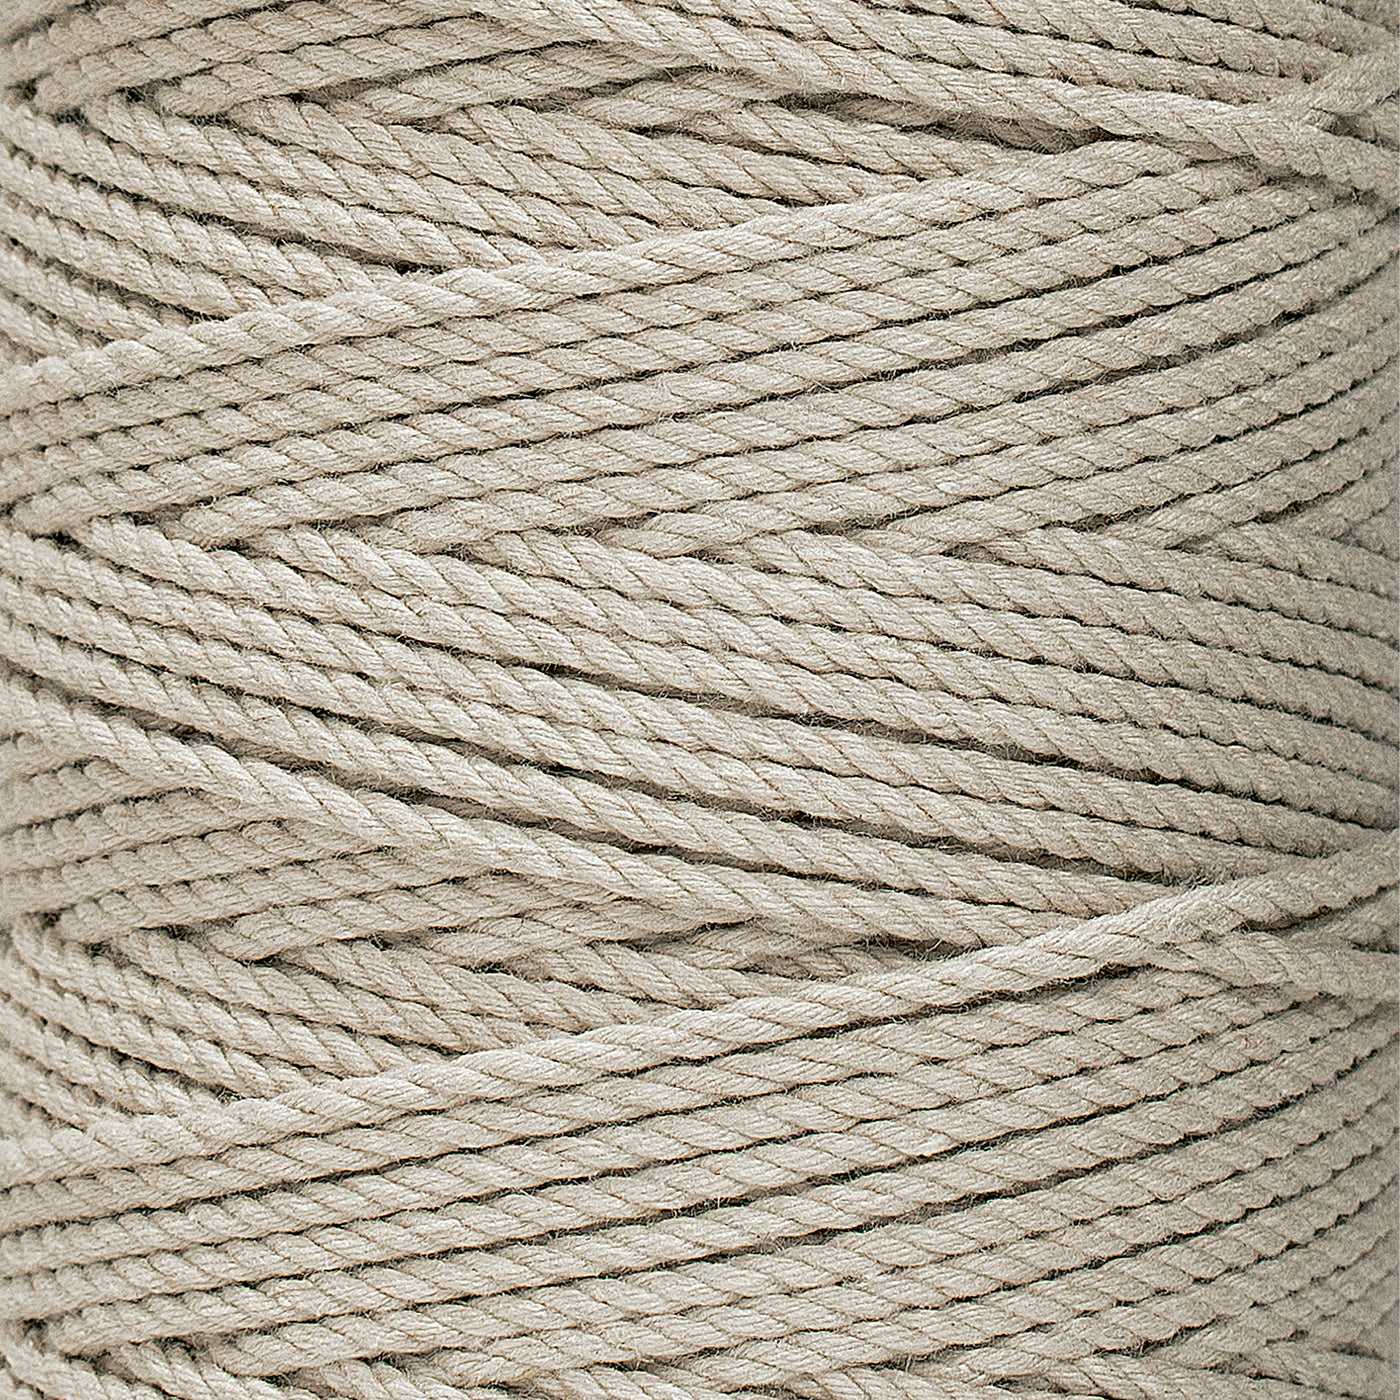 COTTON ROPE ZERO WASTE 2 MM - 3 PLY - MOON COLOR